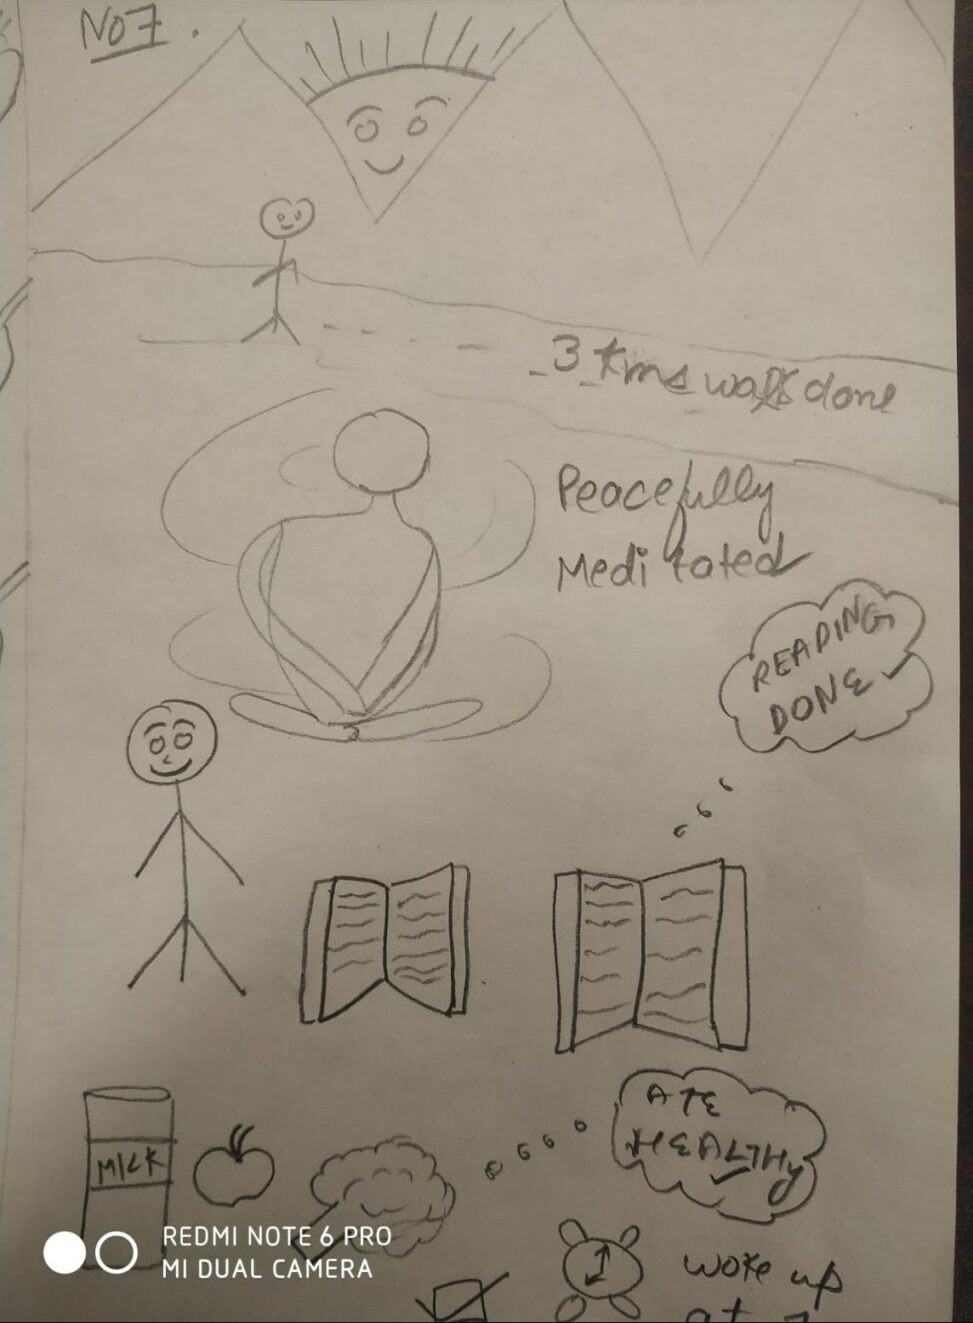 In this comic there stick figure walking on the running track in the peaceful surroundings, doing meditation, reading books and eating healthy foods.